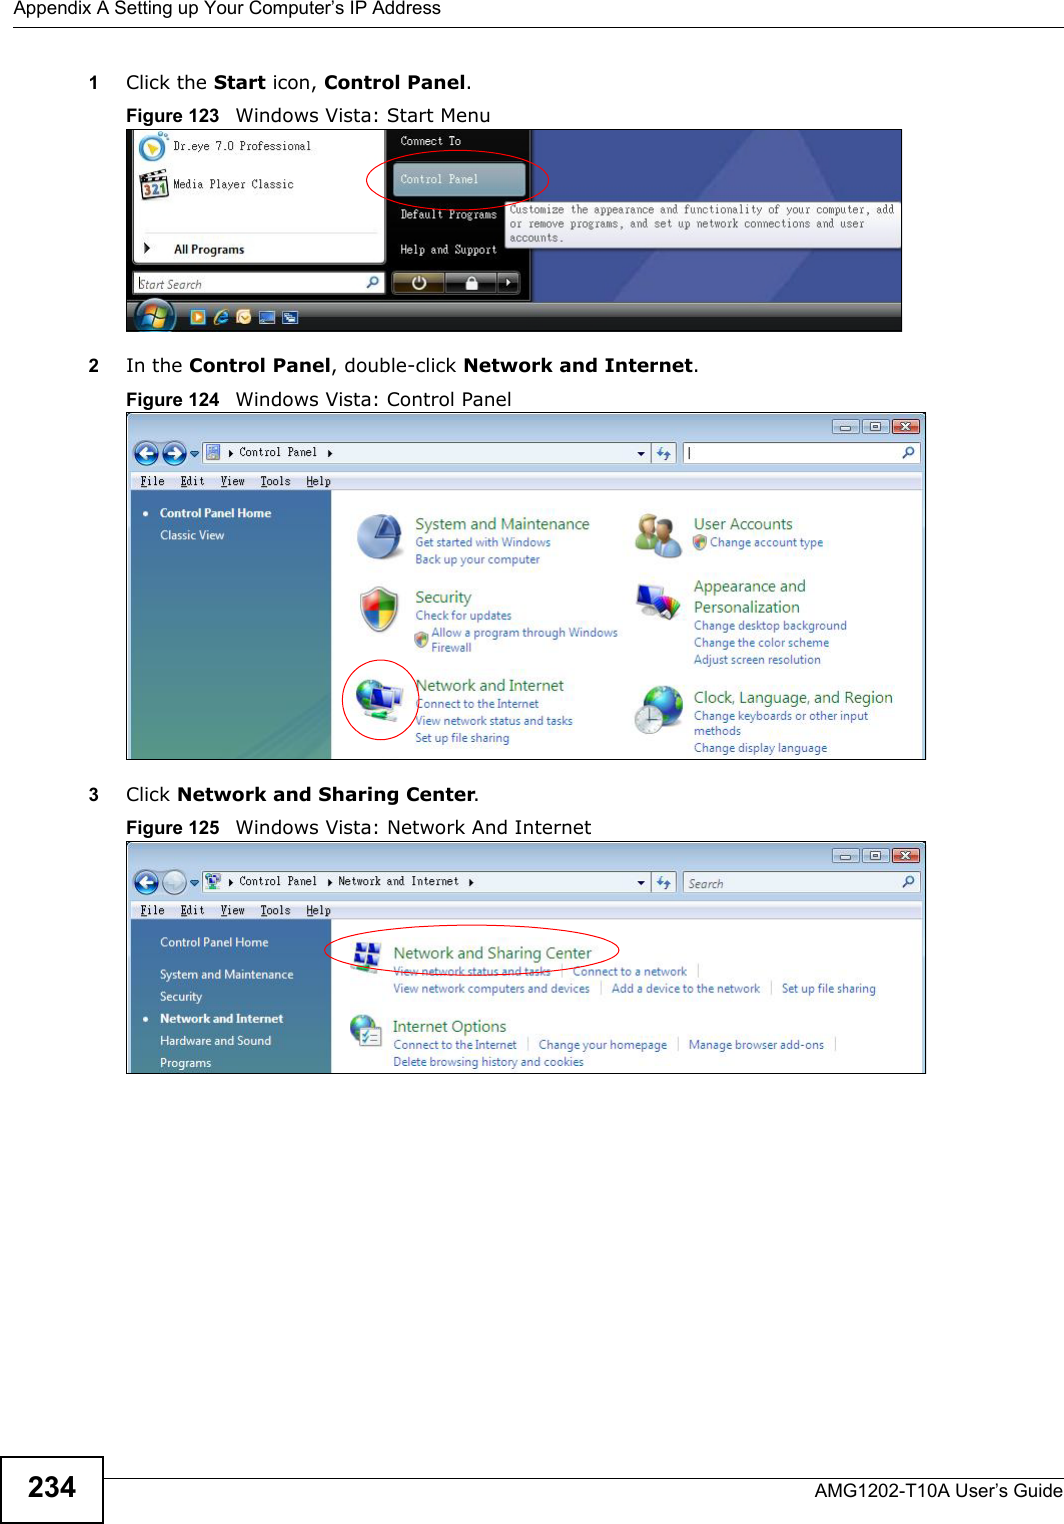 Appendix A Setting up Your Computer’s IP AddressAMG1202-T10A User’s Guide2341Click the Start icon, Control Panel.Figure 123   Windows Vista: Start Menu2In the Control Panel, double-click Network and Internet.Figure 124   Windows Vista: Control Panel3Click Network and Sharing Center.Figure 125   Windows Vista: Network And Internet